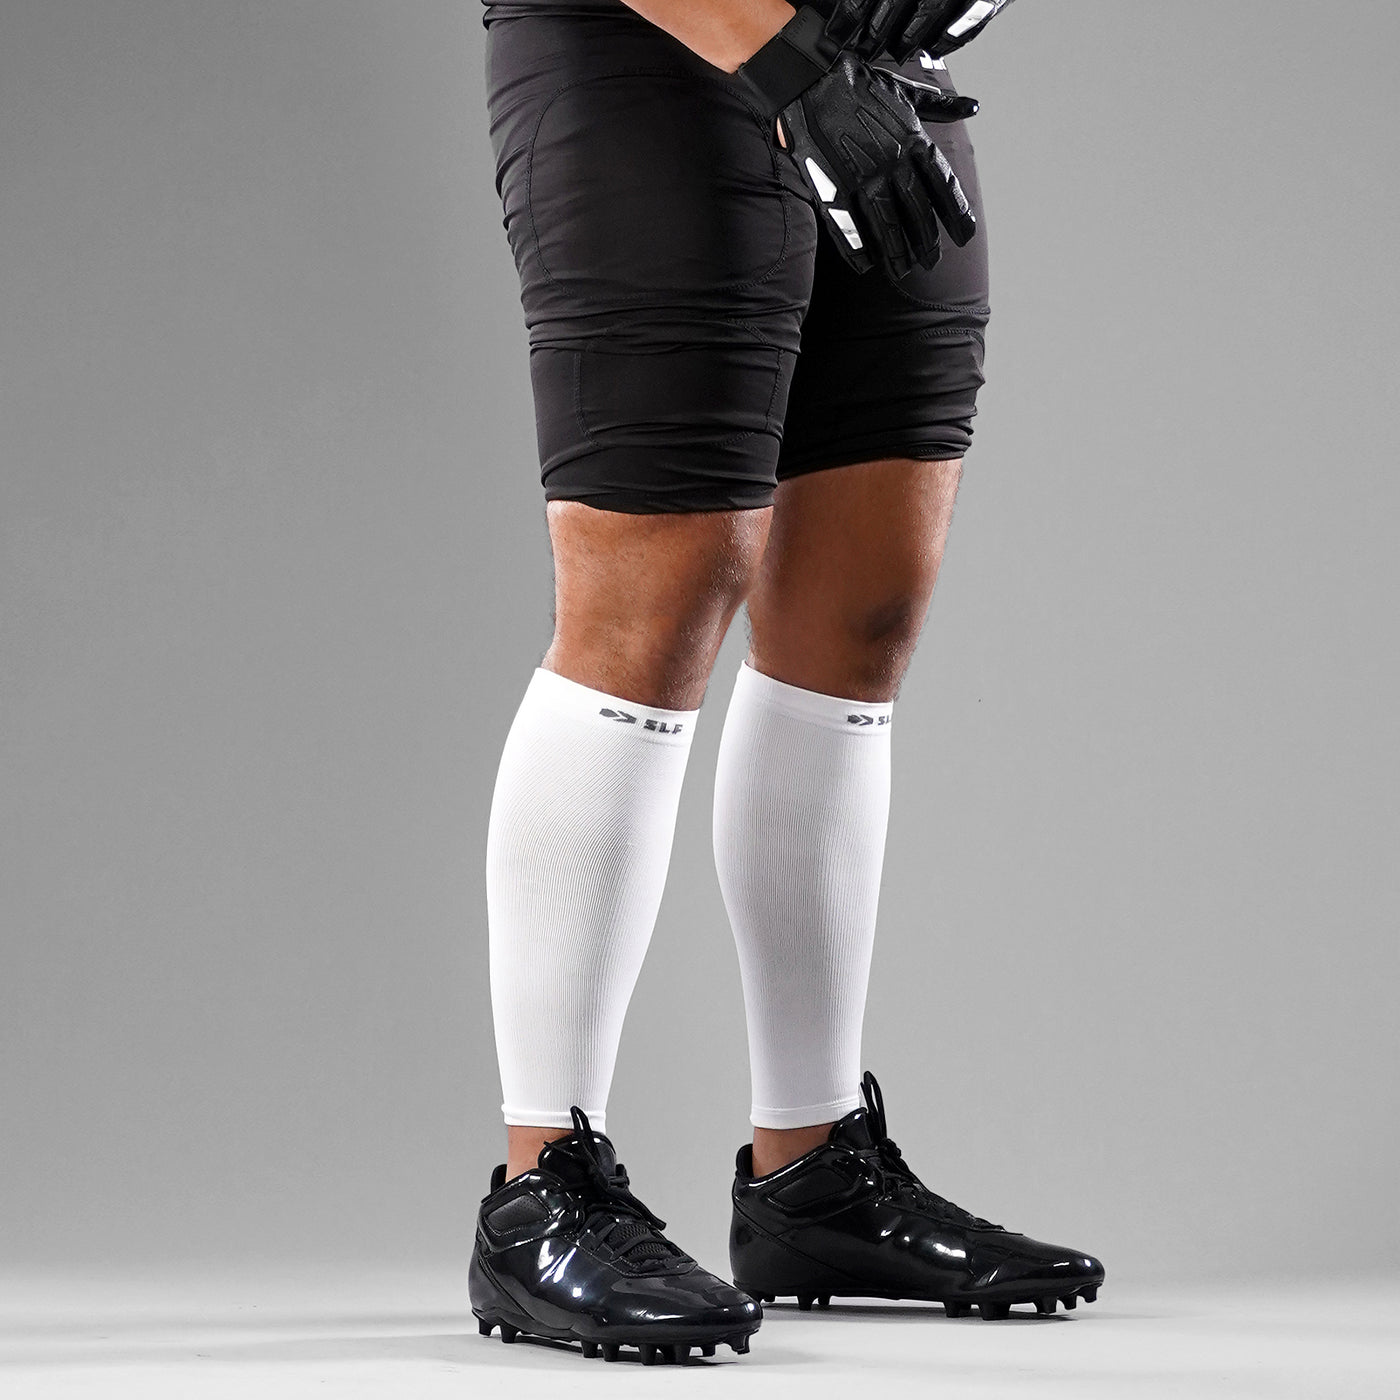 Lineman White Knitted Compression Calf Sleeves - Big